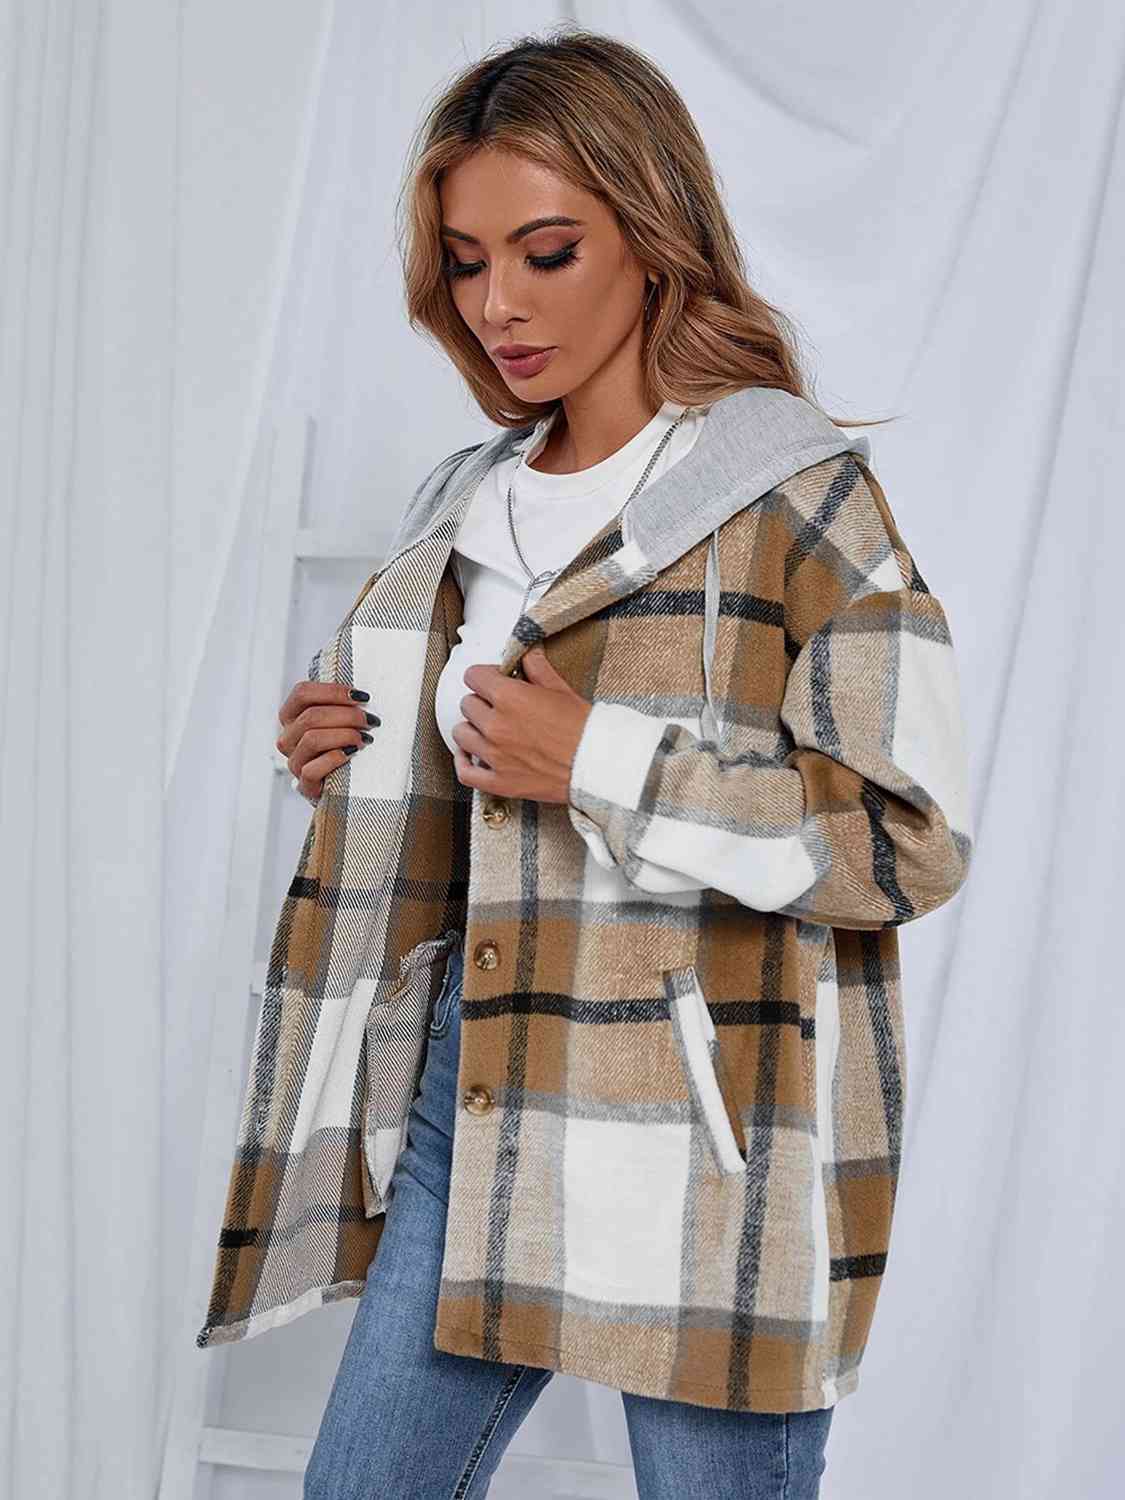 Plaid Hooded Jacket with Pockets